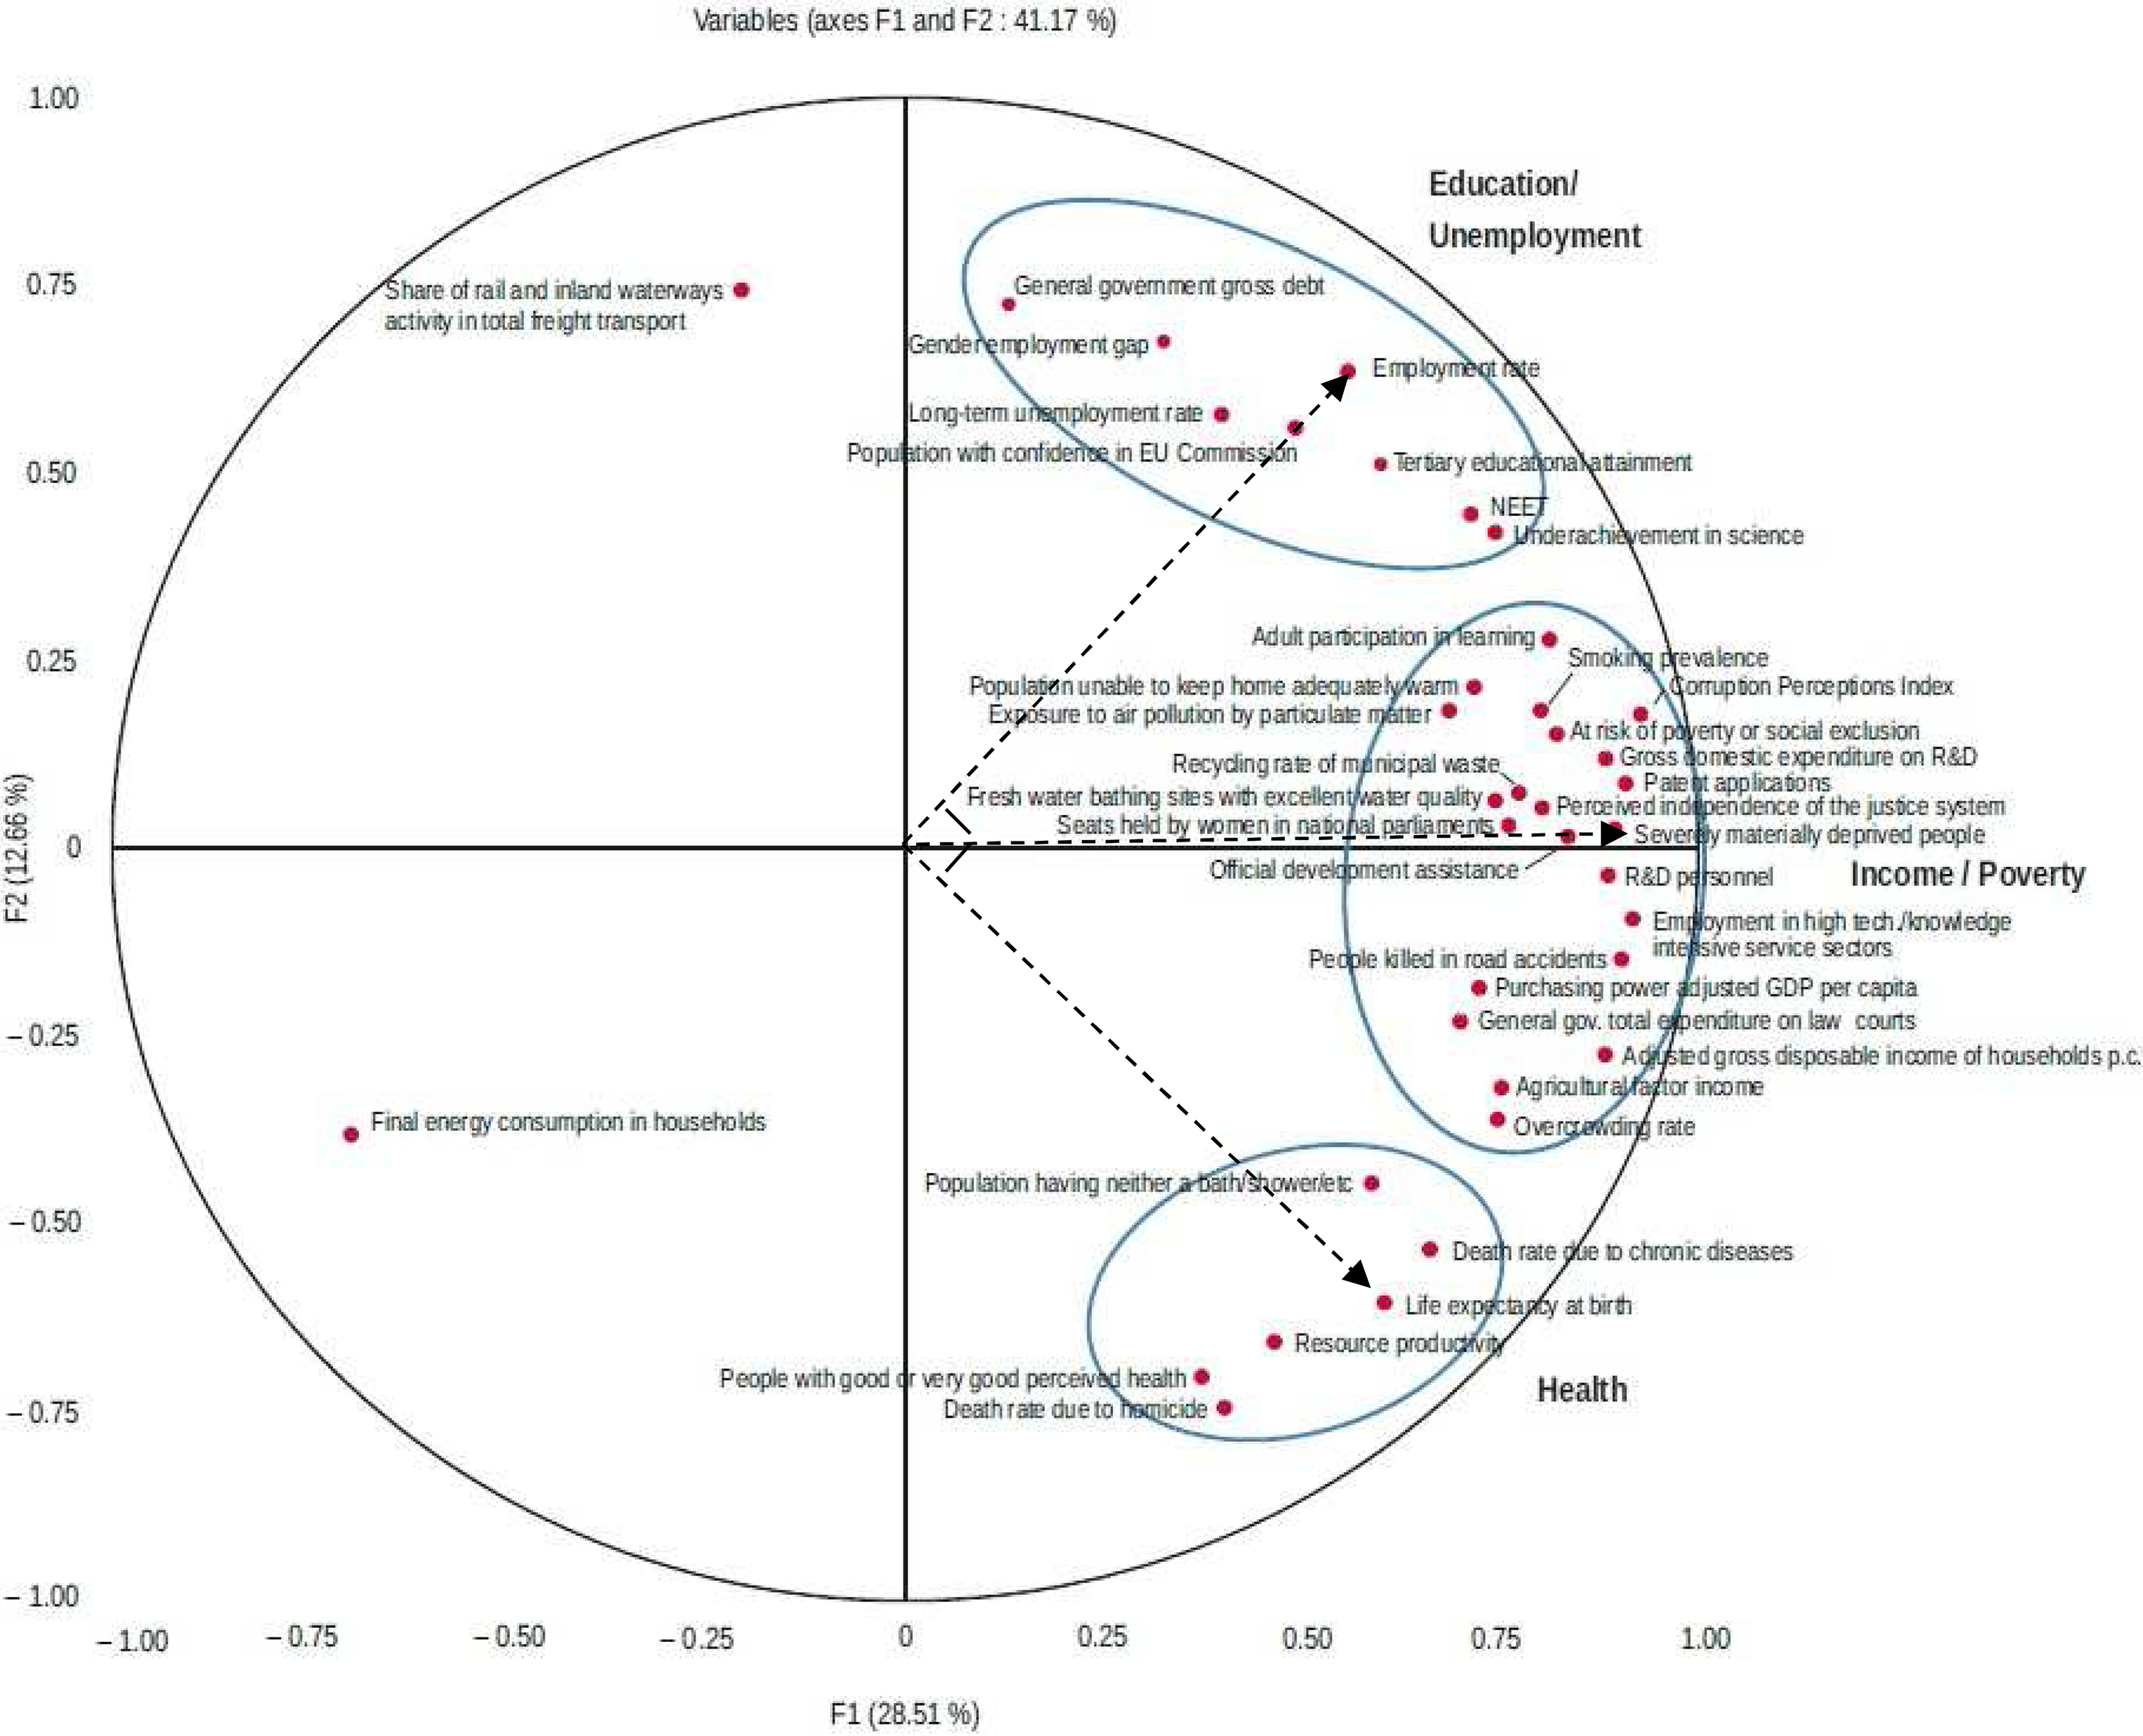 Correlation circle with axes 1 and 2. Source: Eurostat; authors’ calculations.